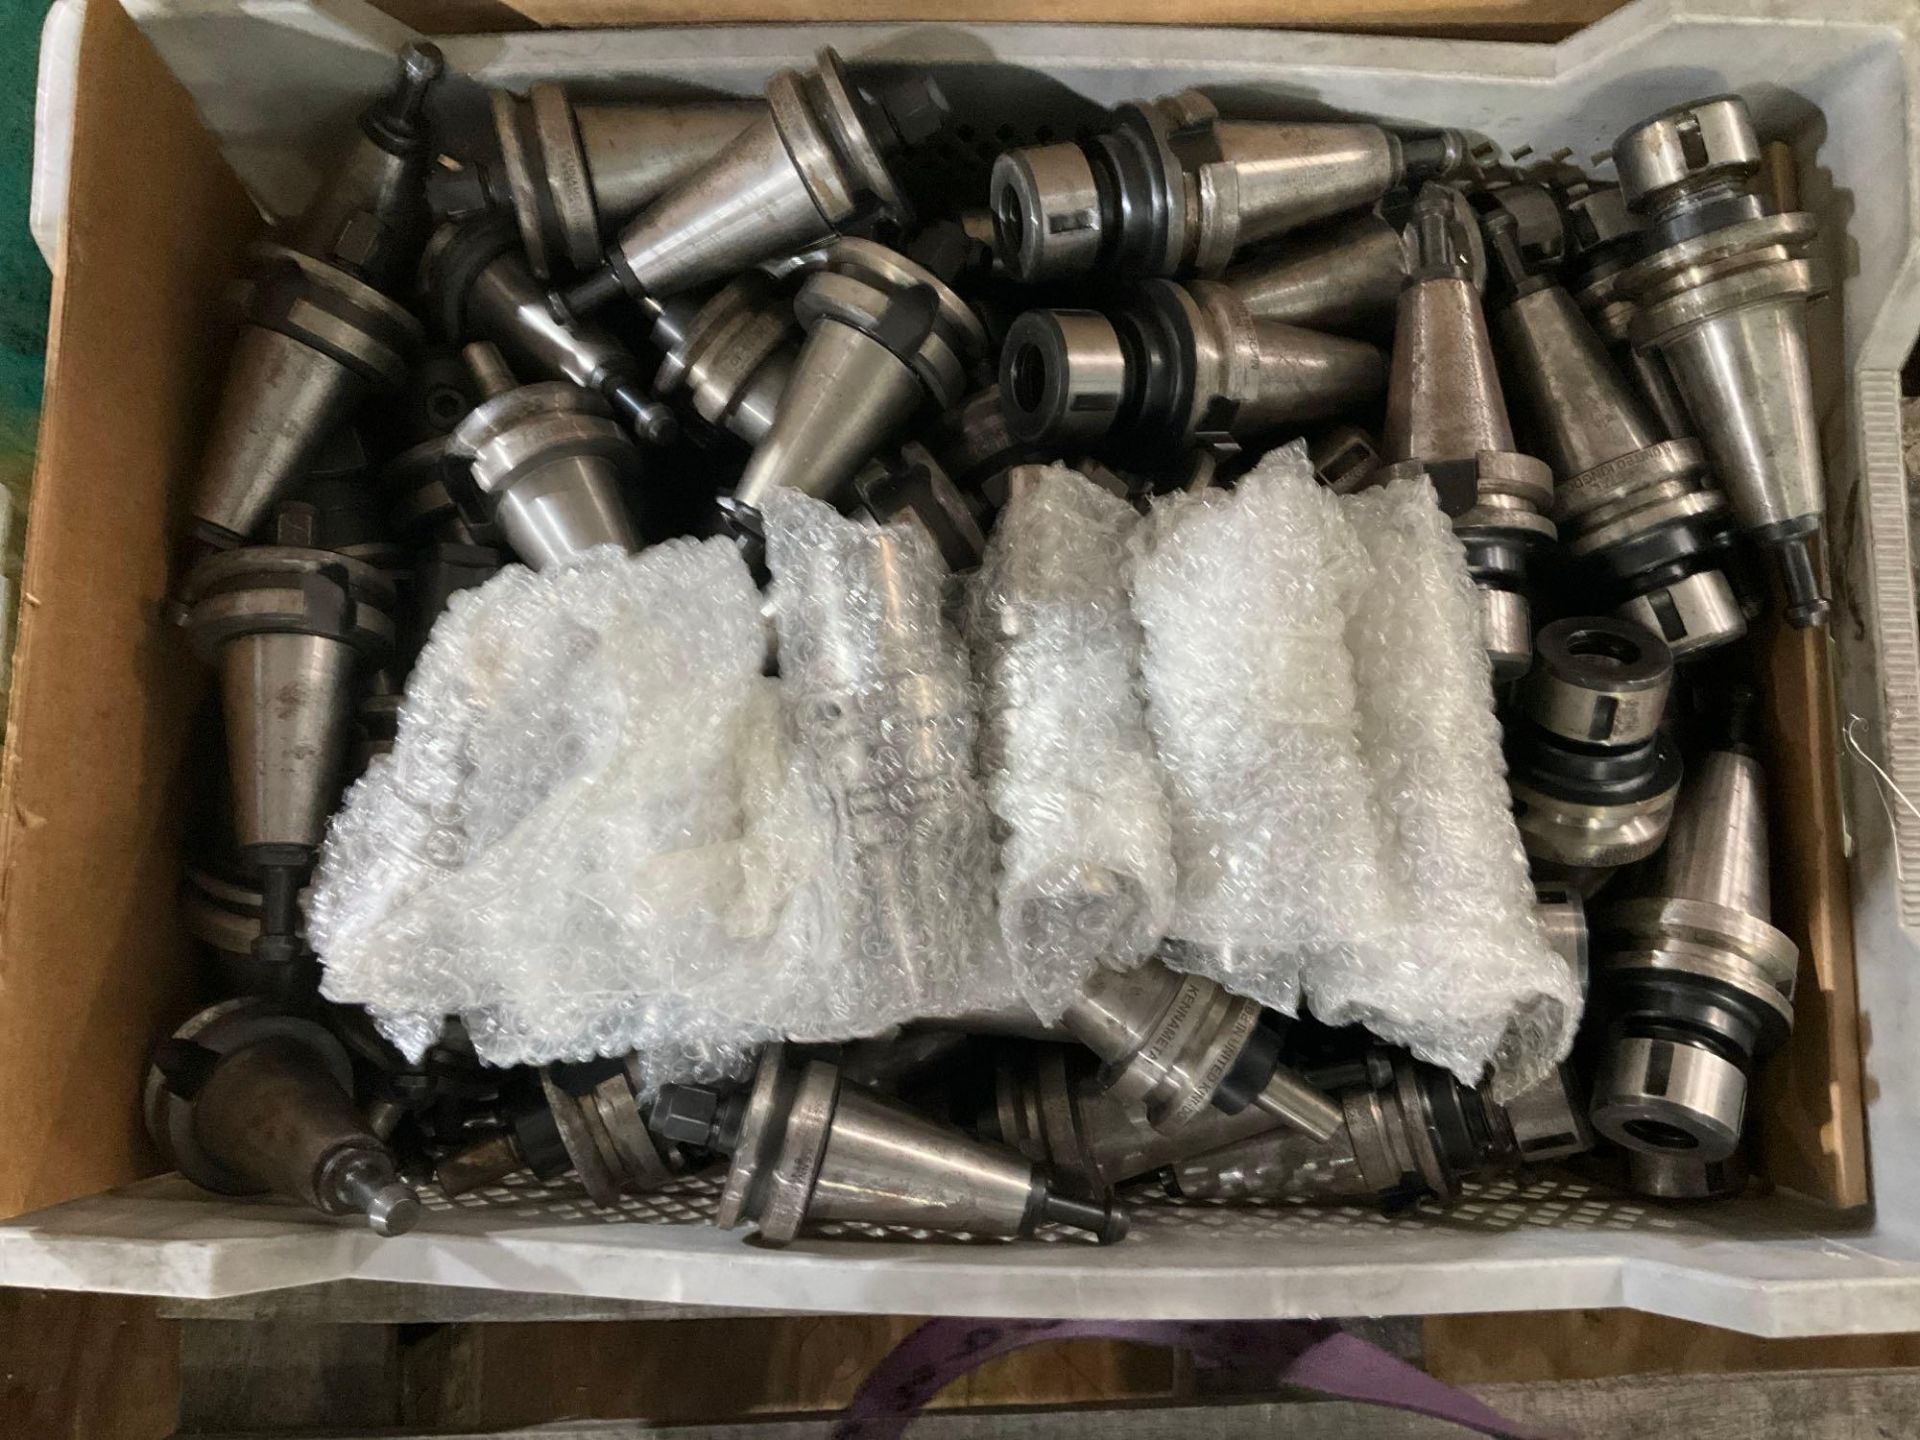 OVER 200 PARLEC, KENNAMETAL, BIG DAISHOWA...COLLET CHUCK; VARIOUS MAKES, MODELS, AND SIZES - Image 10 of 11